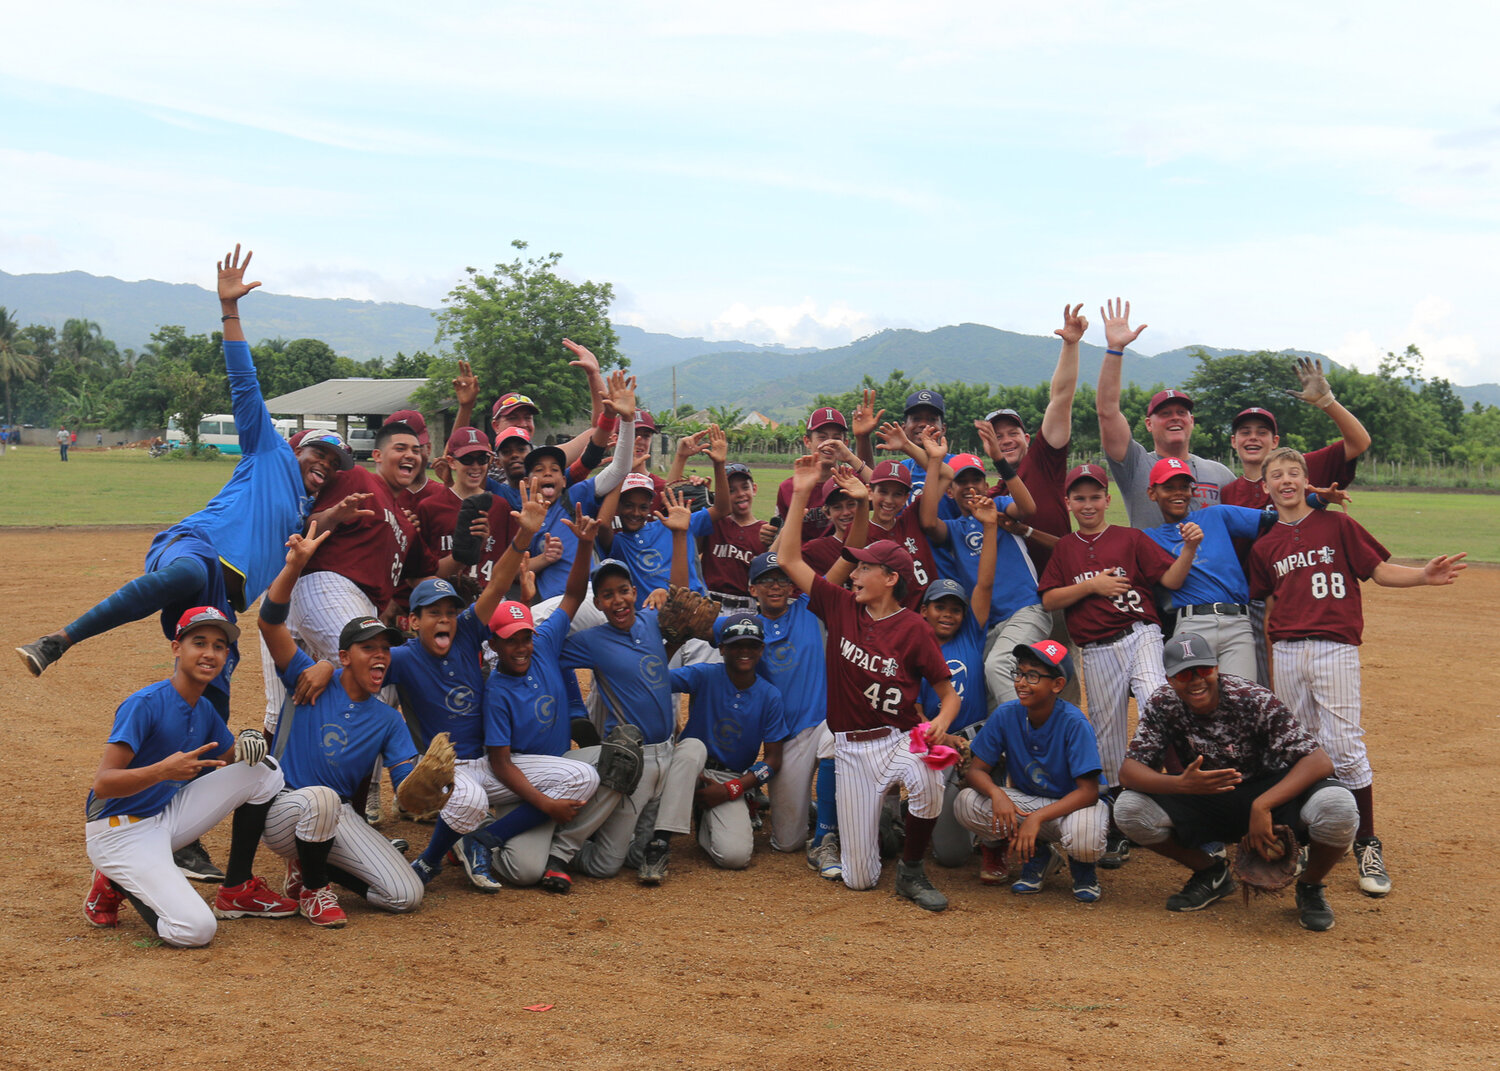 UofL Baseball goes to the Dominican Republic for games and community service